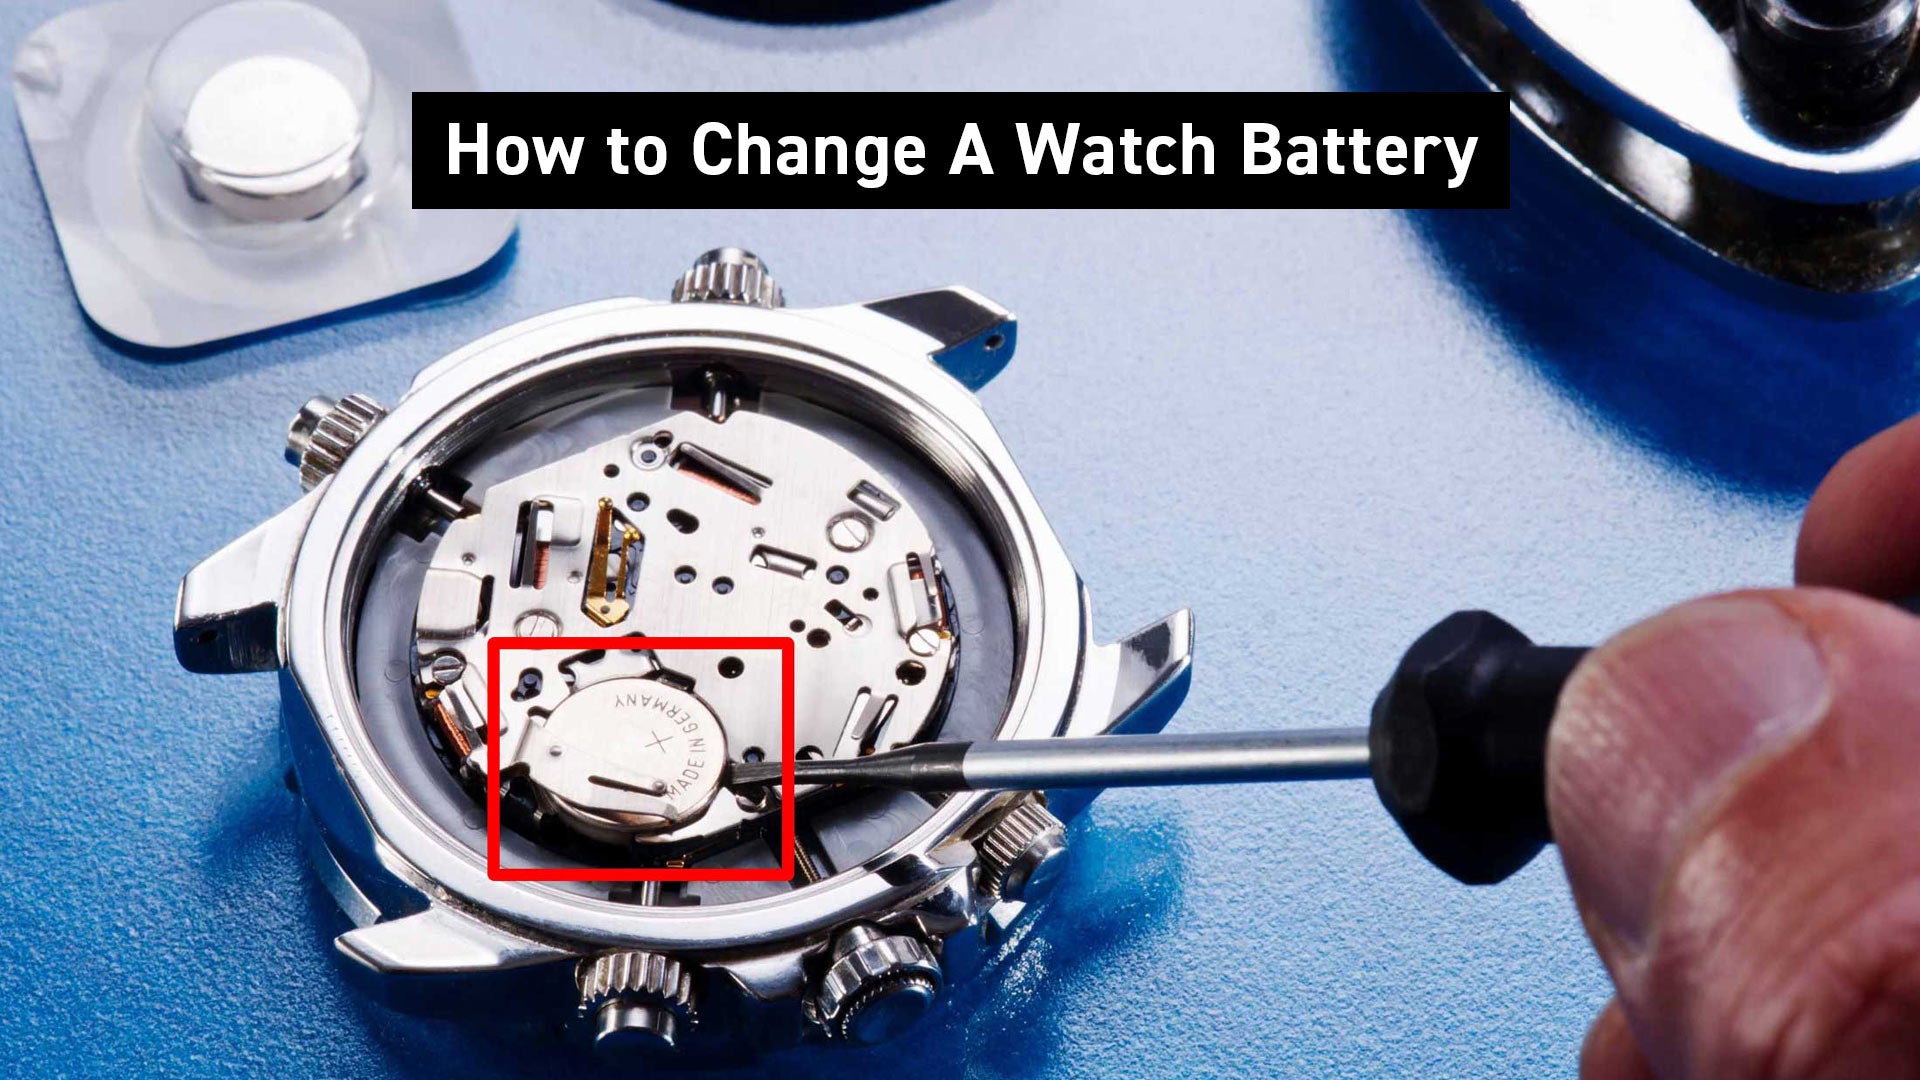 How to Replace a Watch Battery